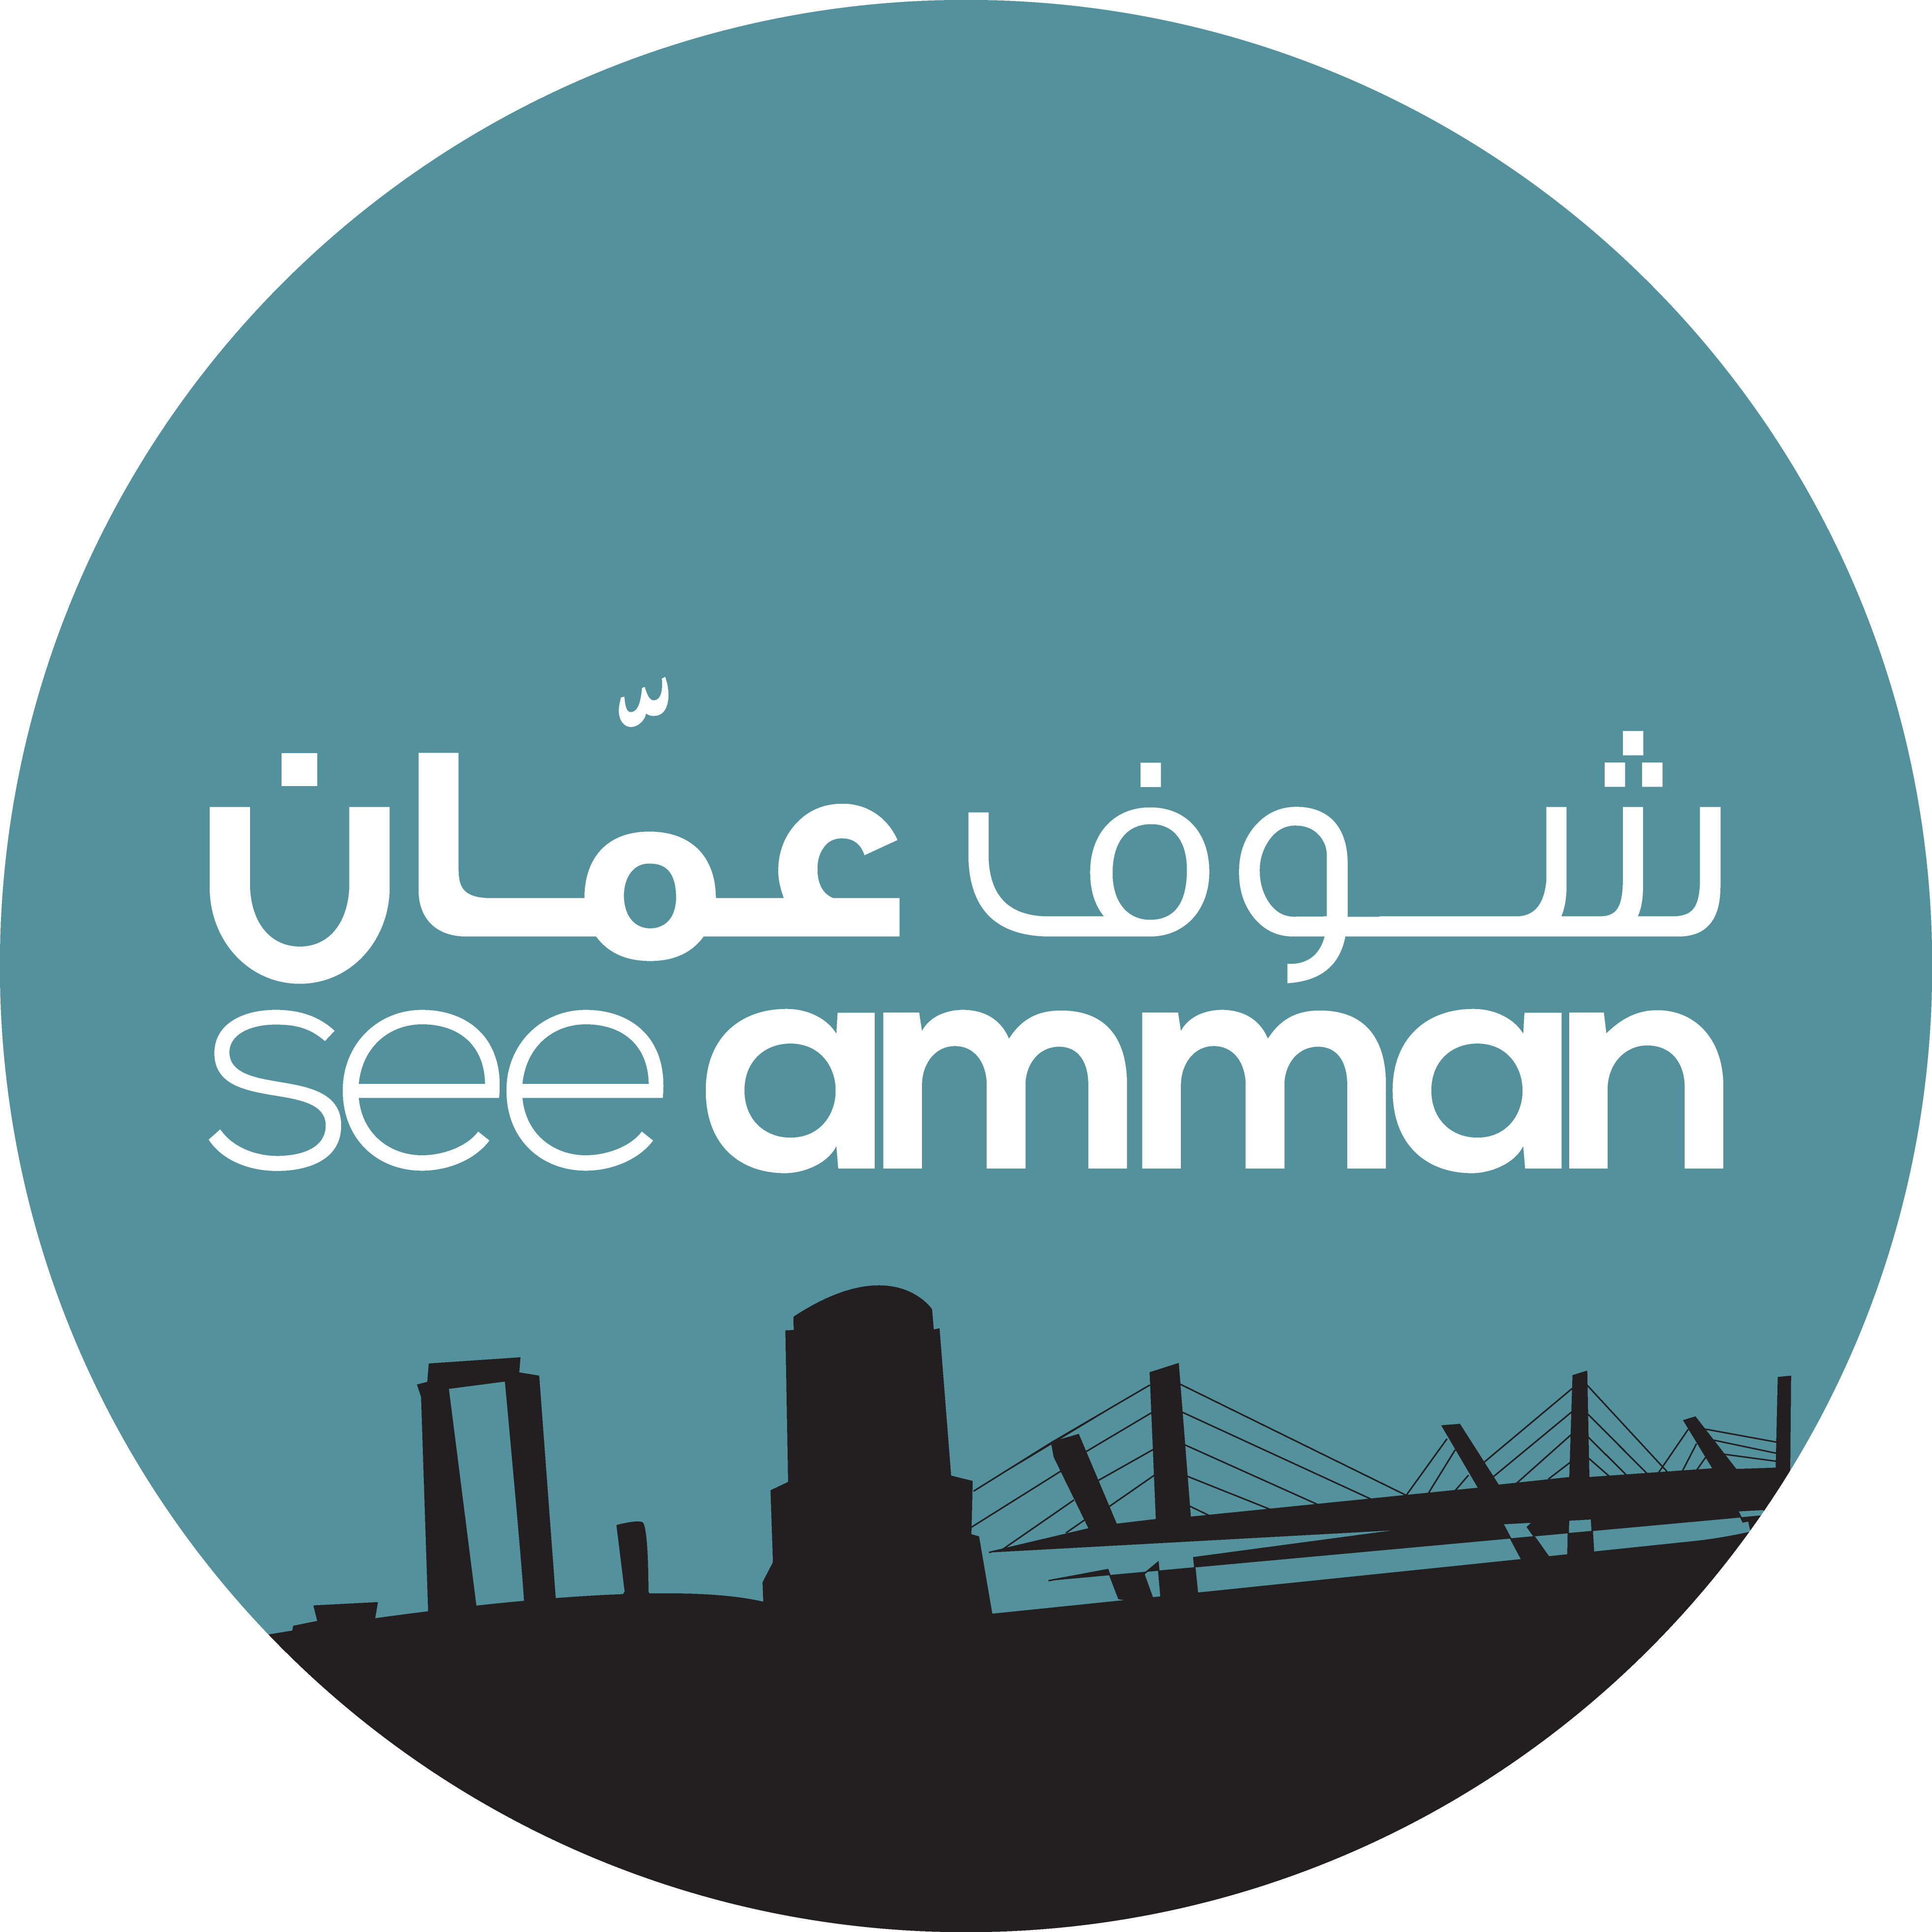 Exposing the beautiful city of Amman via instagram, find us: #SeeAmman.
Tag us, and send pictures to: seeamman@gmail.com